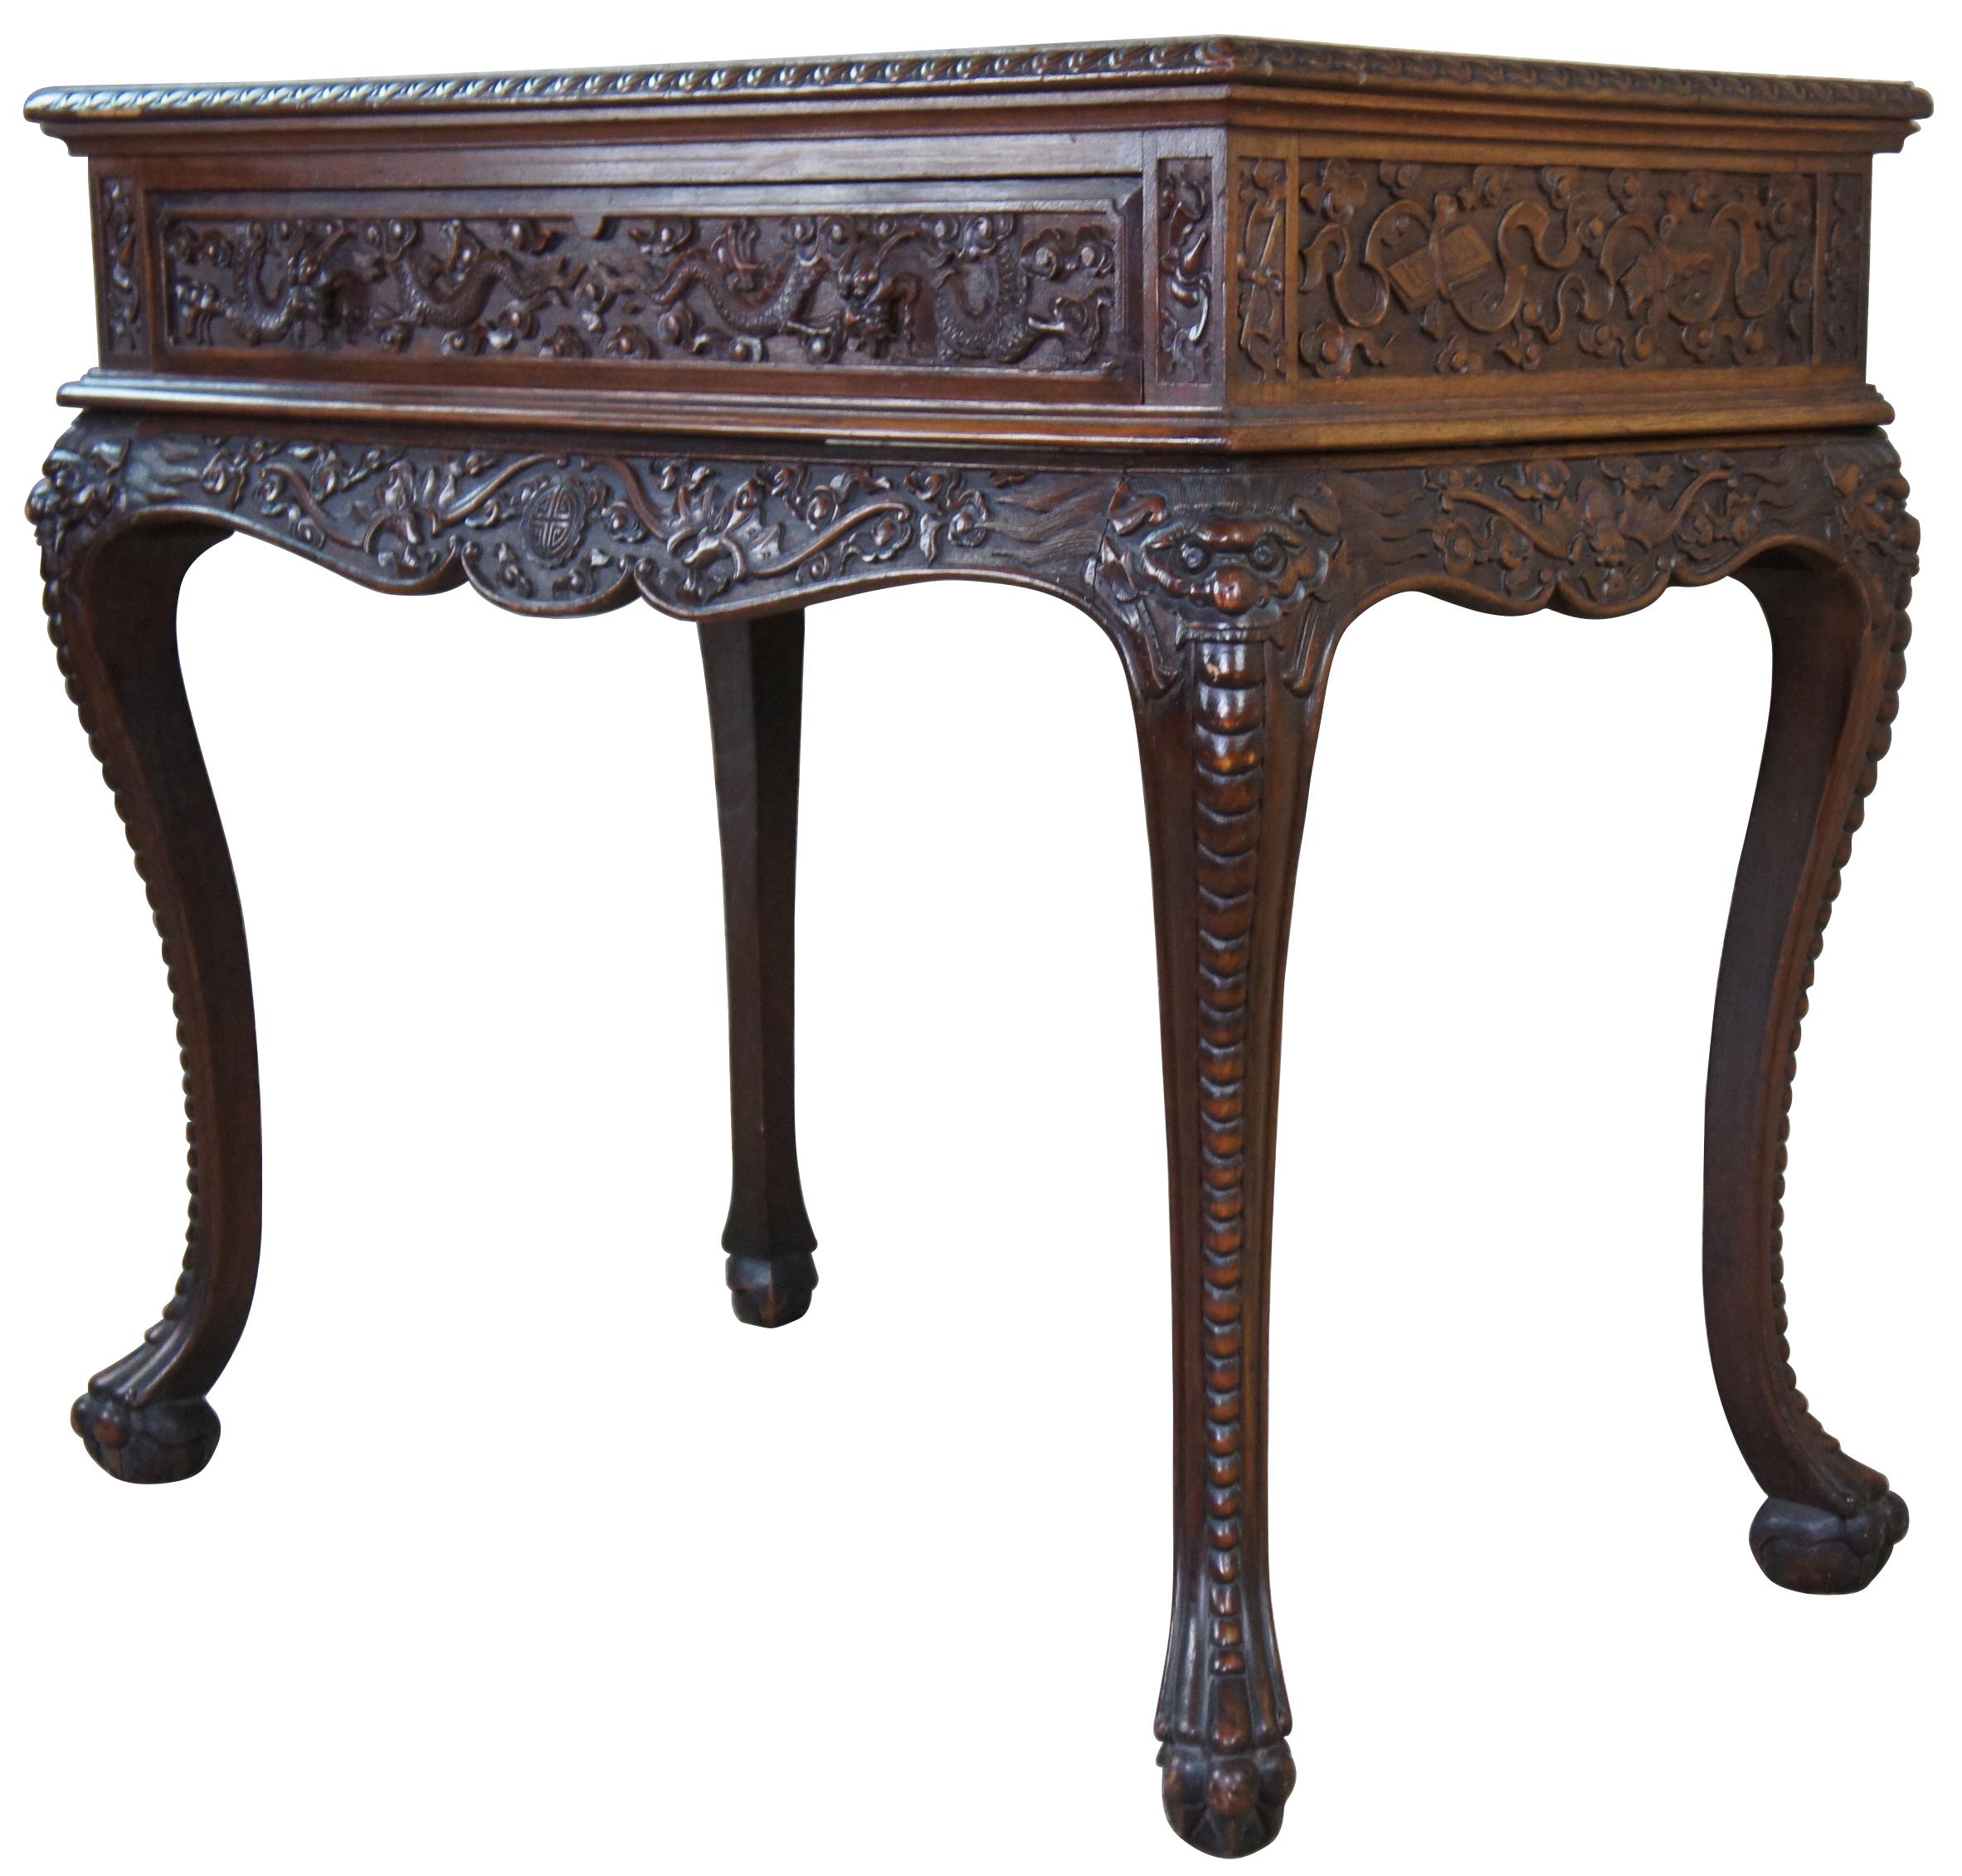 Monumental Antique American Carved Mahogany High Relief Oriental Dining Suite For Sale 10